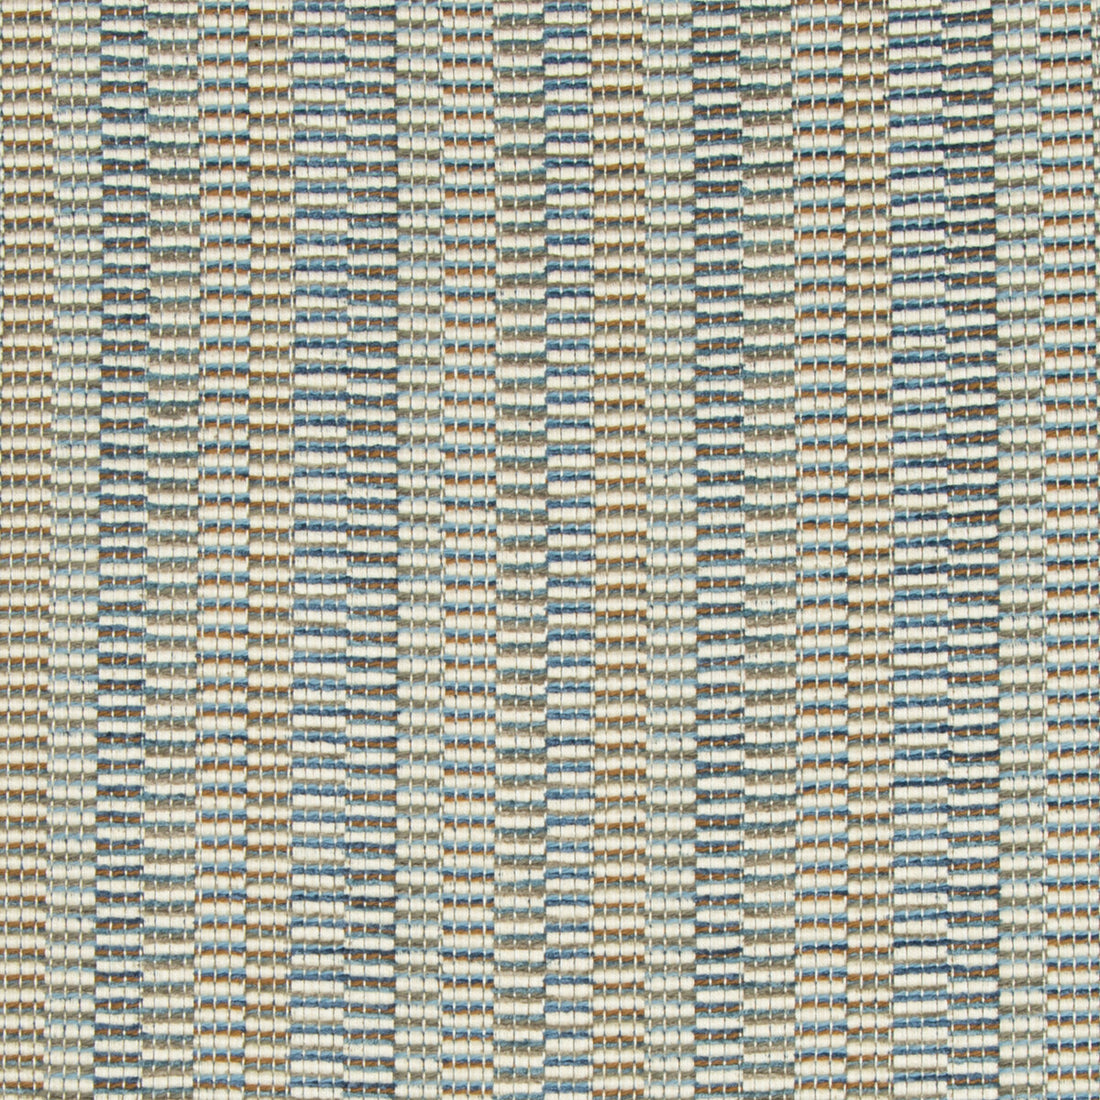 Kravet Contract fabric in 34732-521 color - pattern 34732.521.0 - by Kravet Contract in the Crypton Incase collection